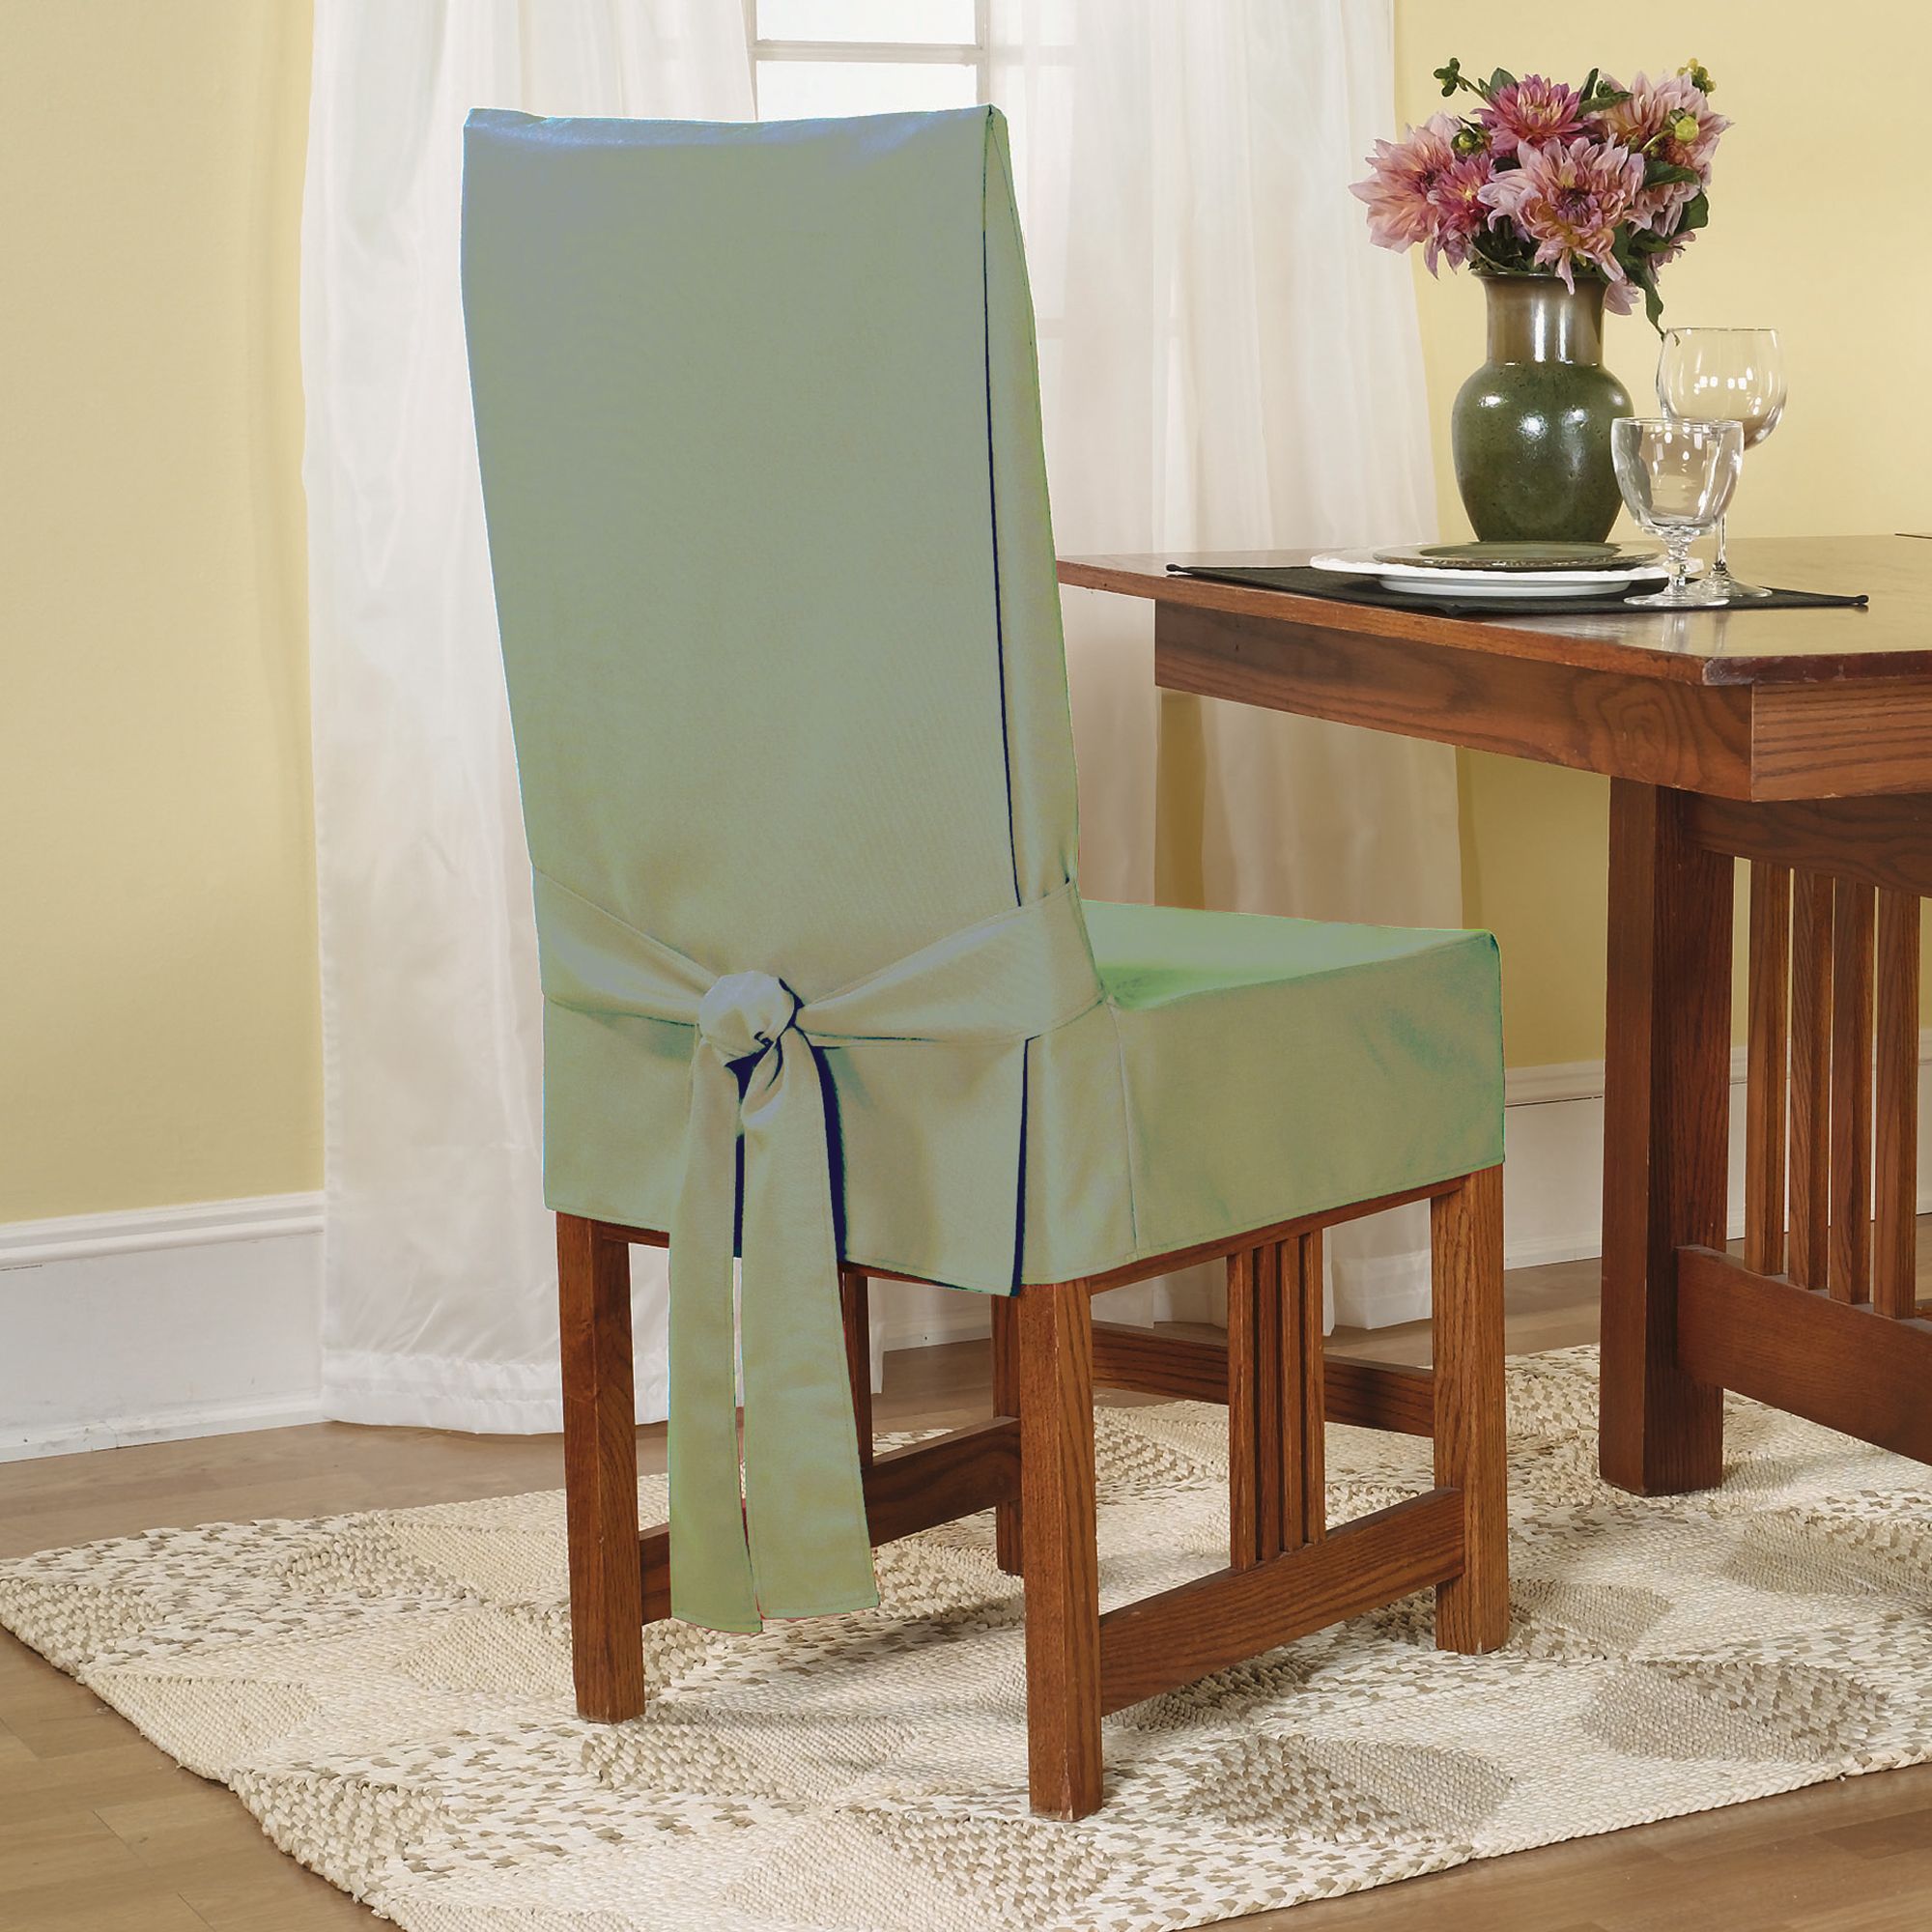 Sure Fit Cotton Duck Sage Shorty Dining Room Chair Slipcover